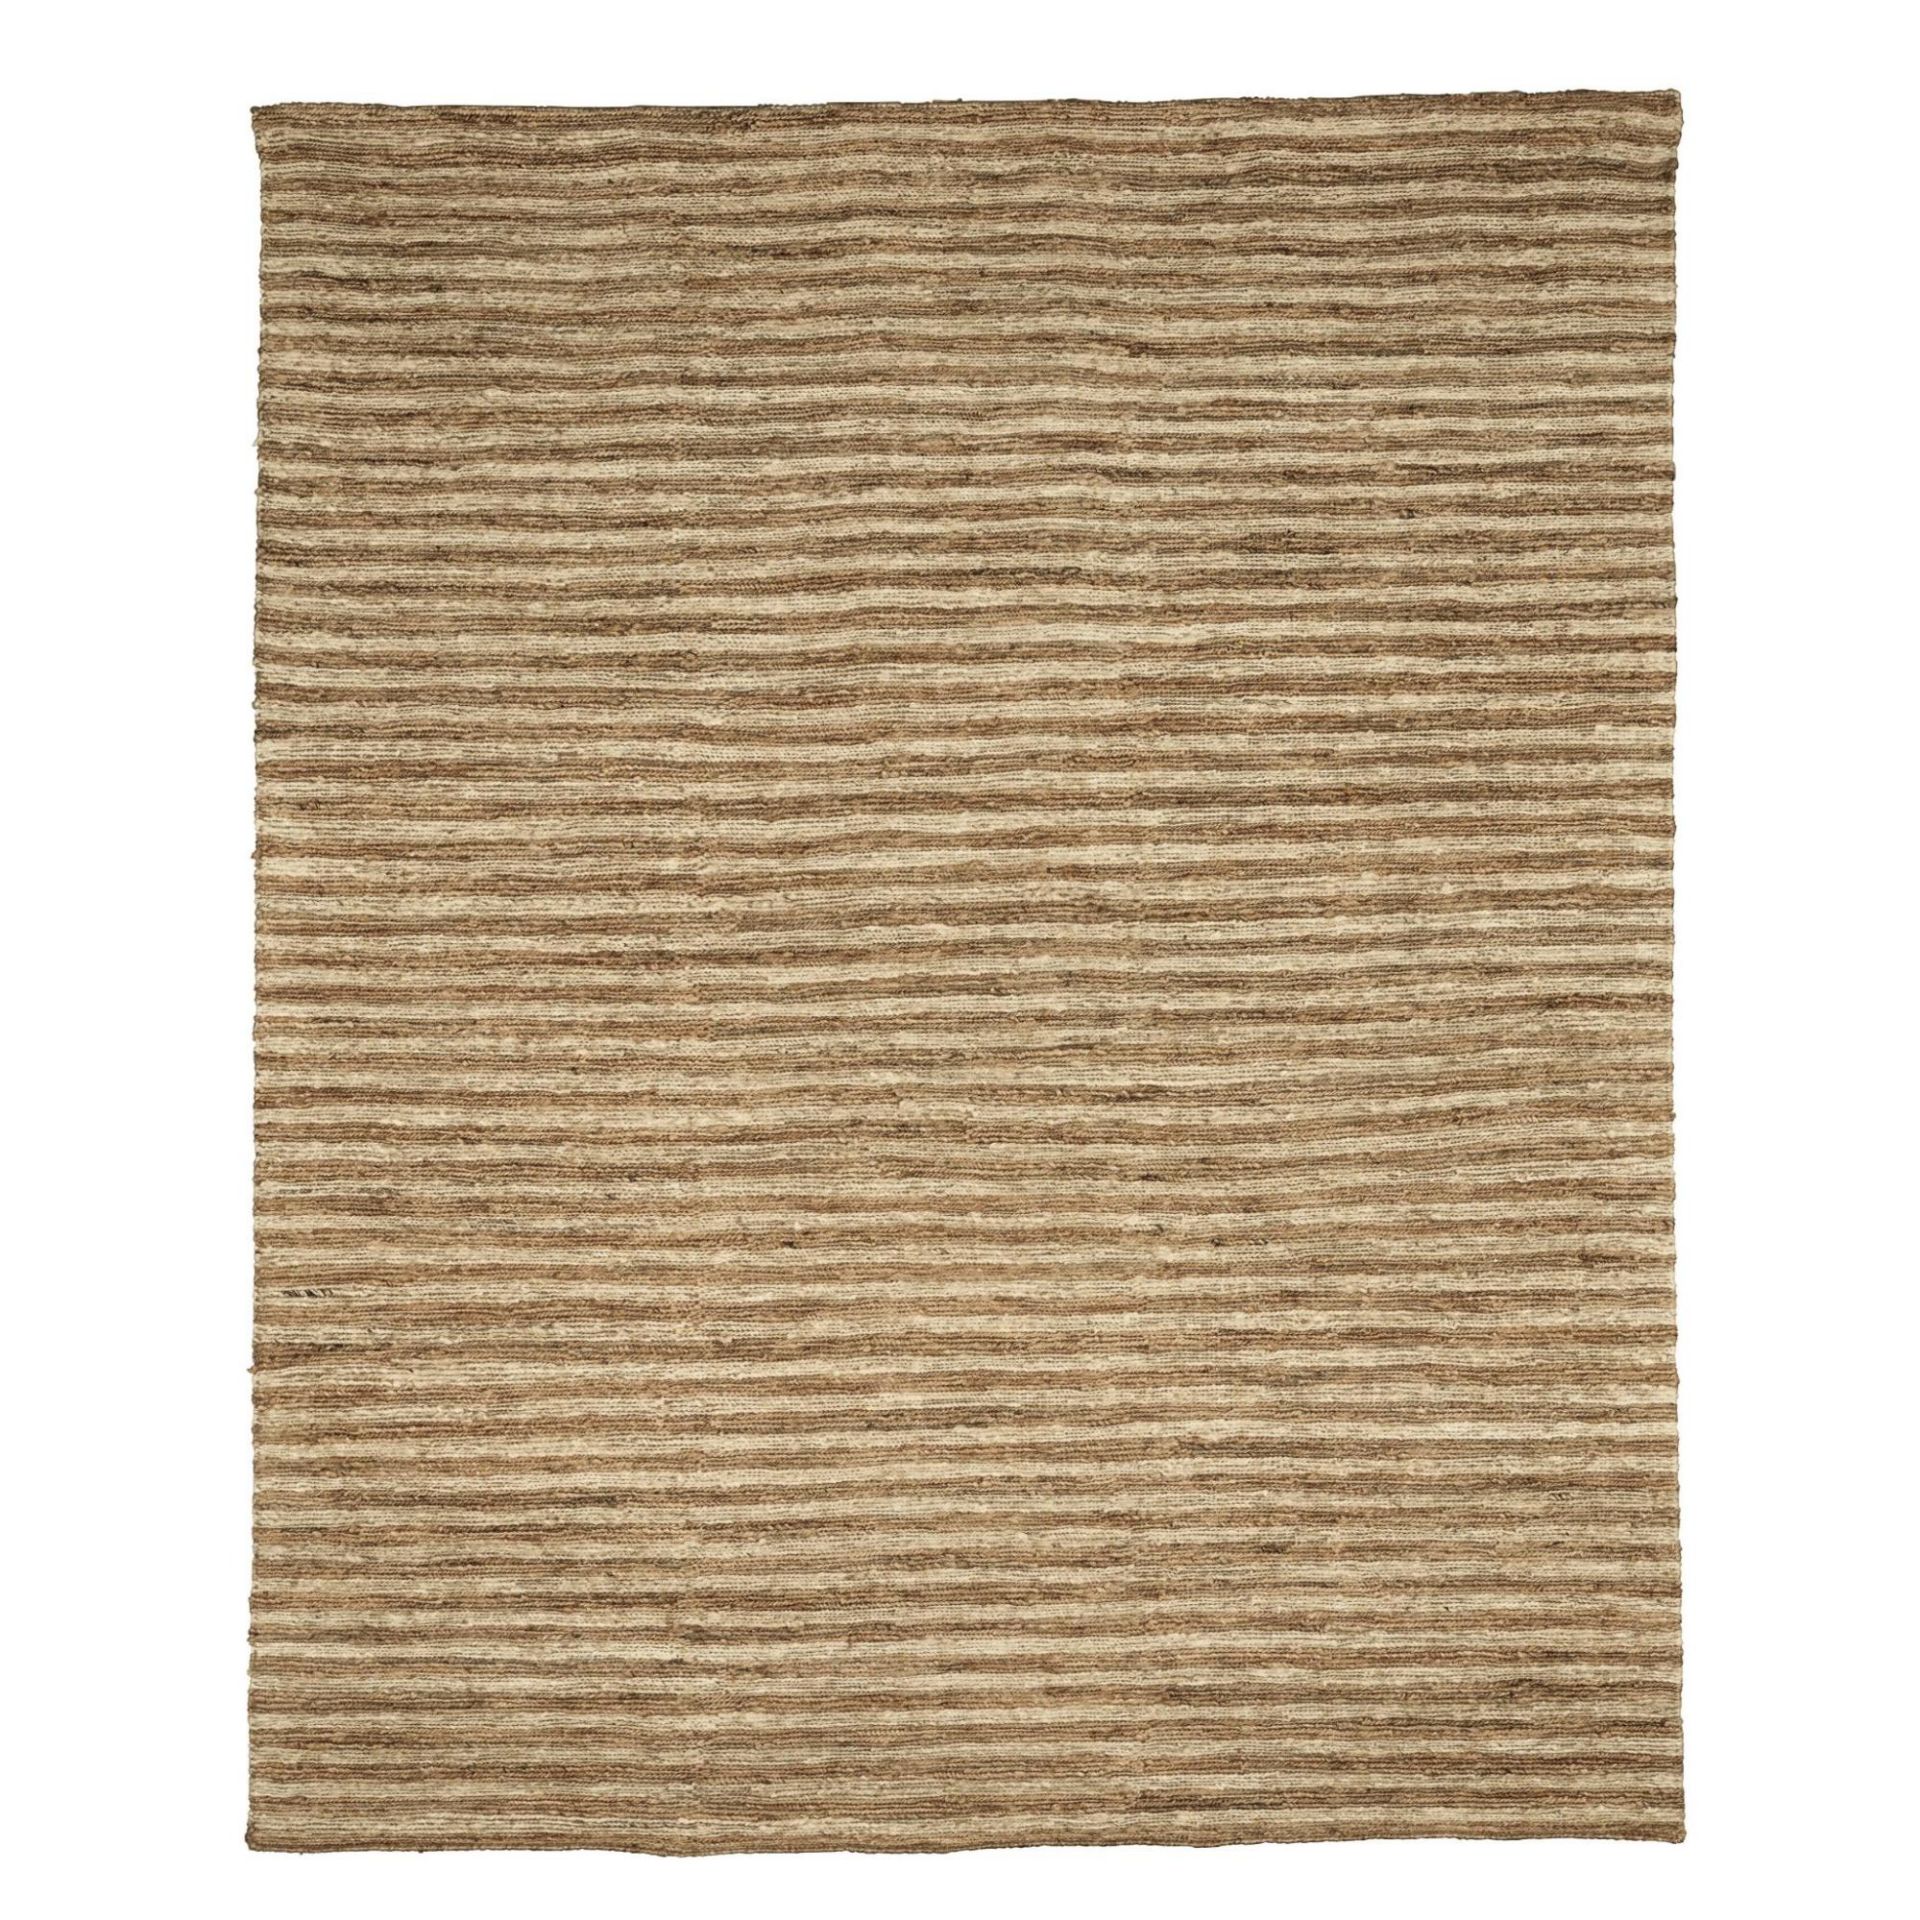 OKA Zlato hand-knotted Indoor Natural Rug Details: Colour: Natural Brown Material: Pure jute